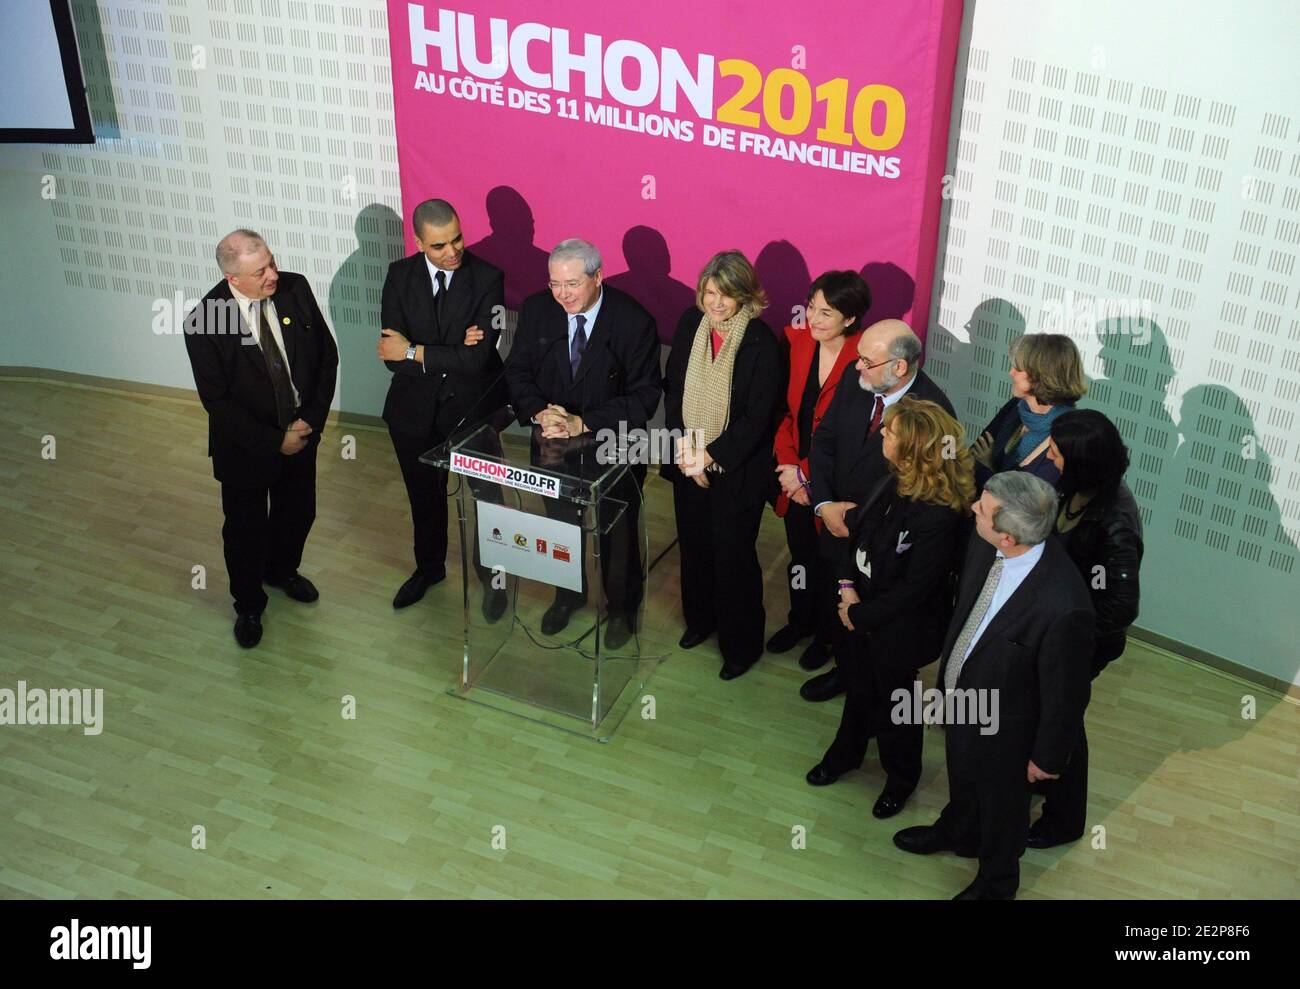 Jean-Paul Huchon, outgoing president of the Regional Council of Ile de France, and candidate to his own succession delivers a speech in presence of his heads of list after the results of the first round of the regional elections in Paris, France on March 14, 2010. Photo by Mousse/ABACAPRESS.COM Stock Photo